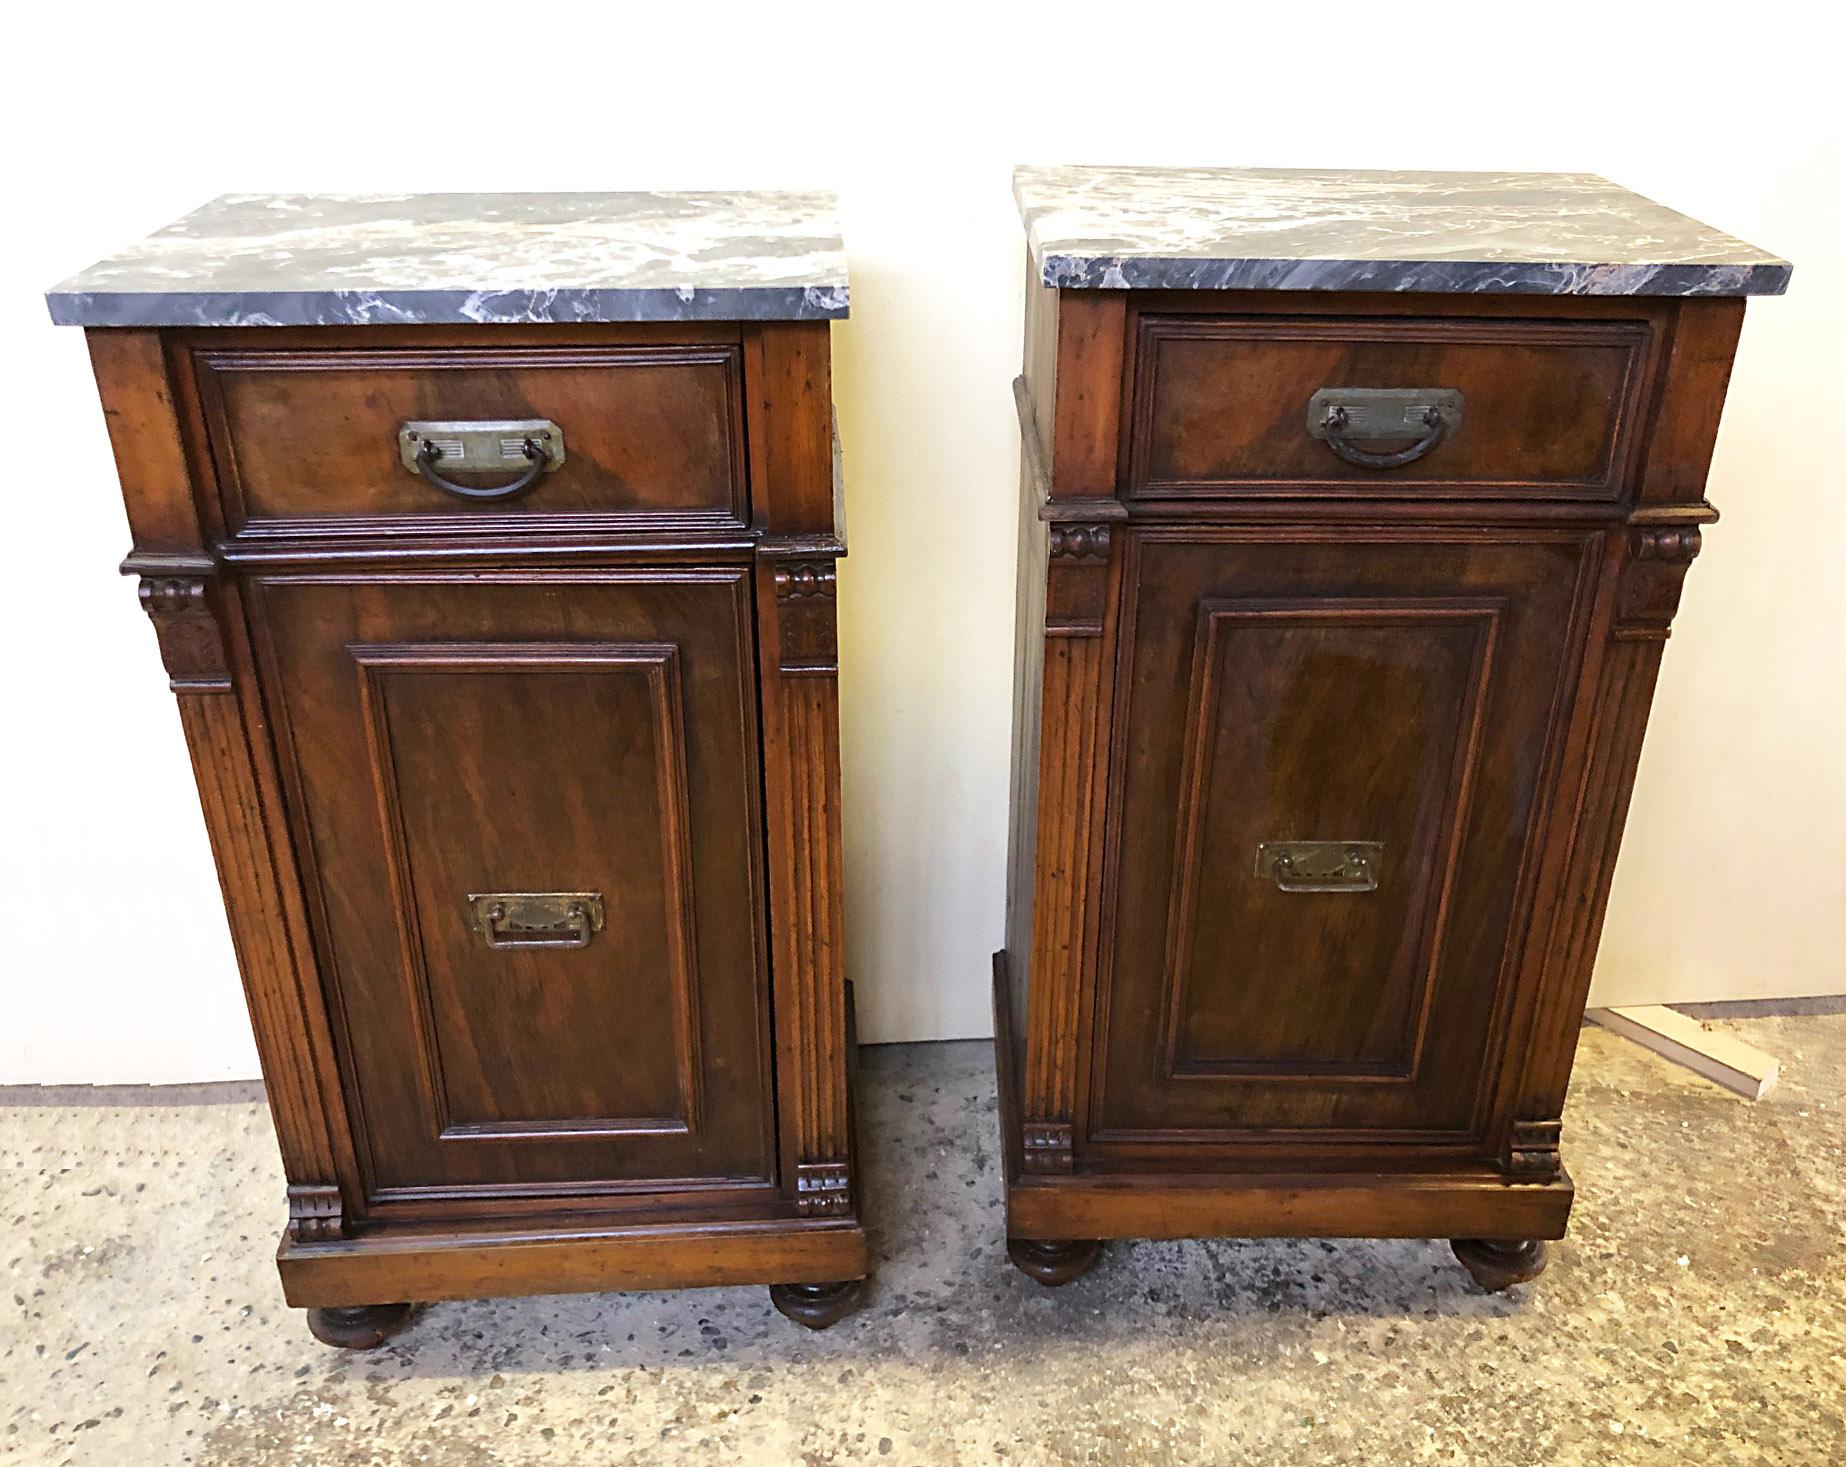 Pair of Italian walnut bedside tables from 1880, natural color, with drawer, Portoro marble.
They are one right and one left and the Italian marble is very elegant and precious.
Coming from an important Florentine villa.
The transport quote for